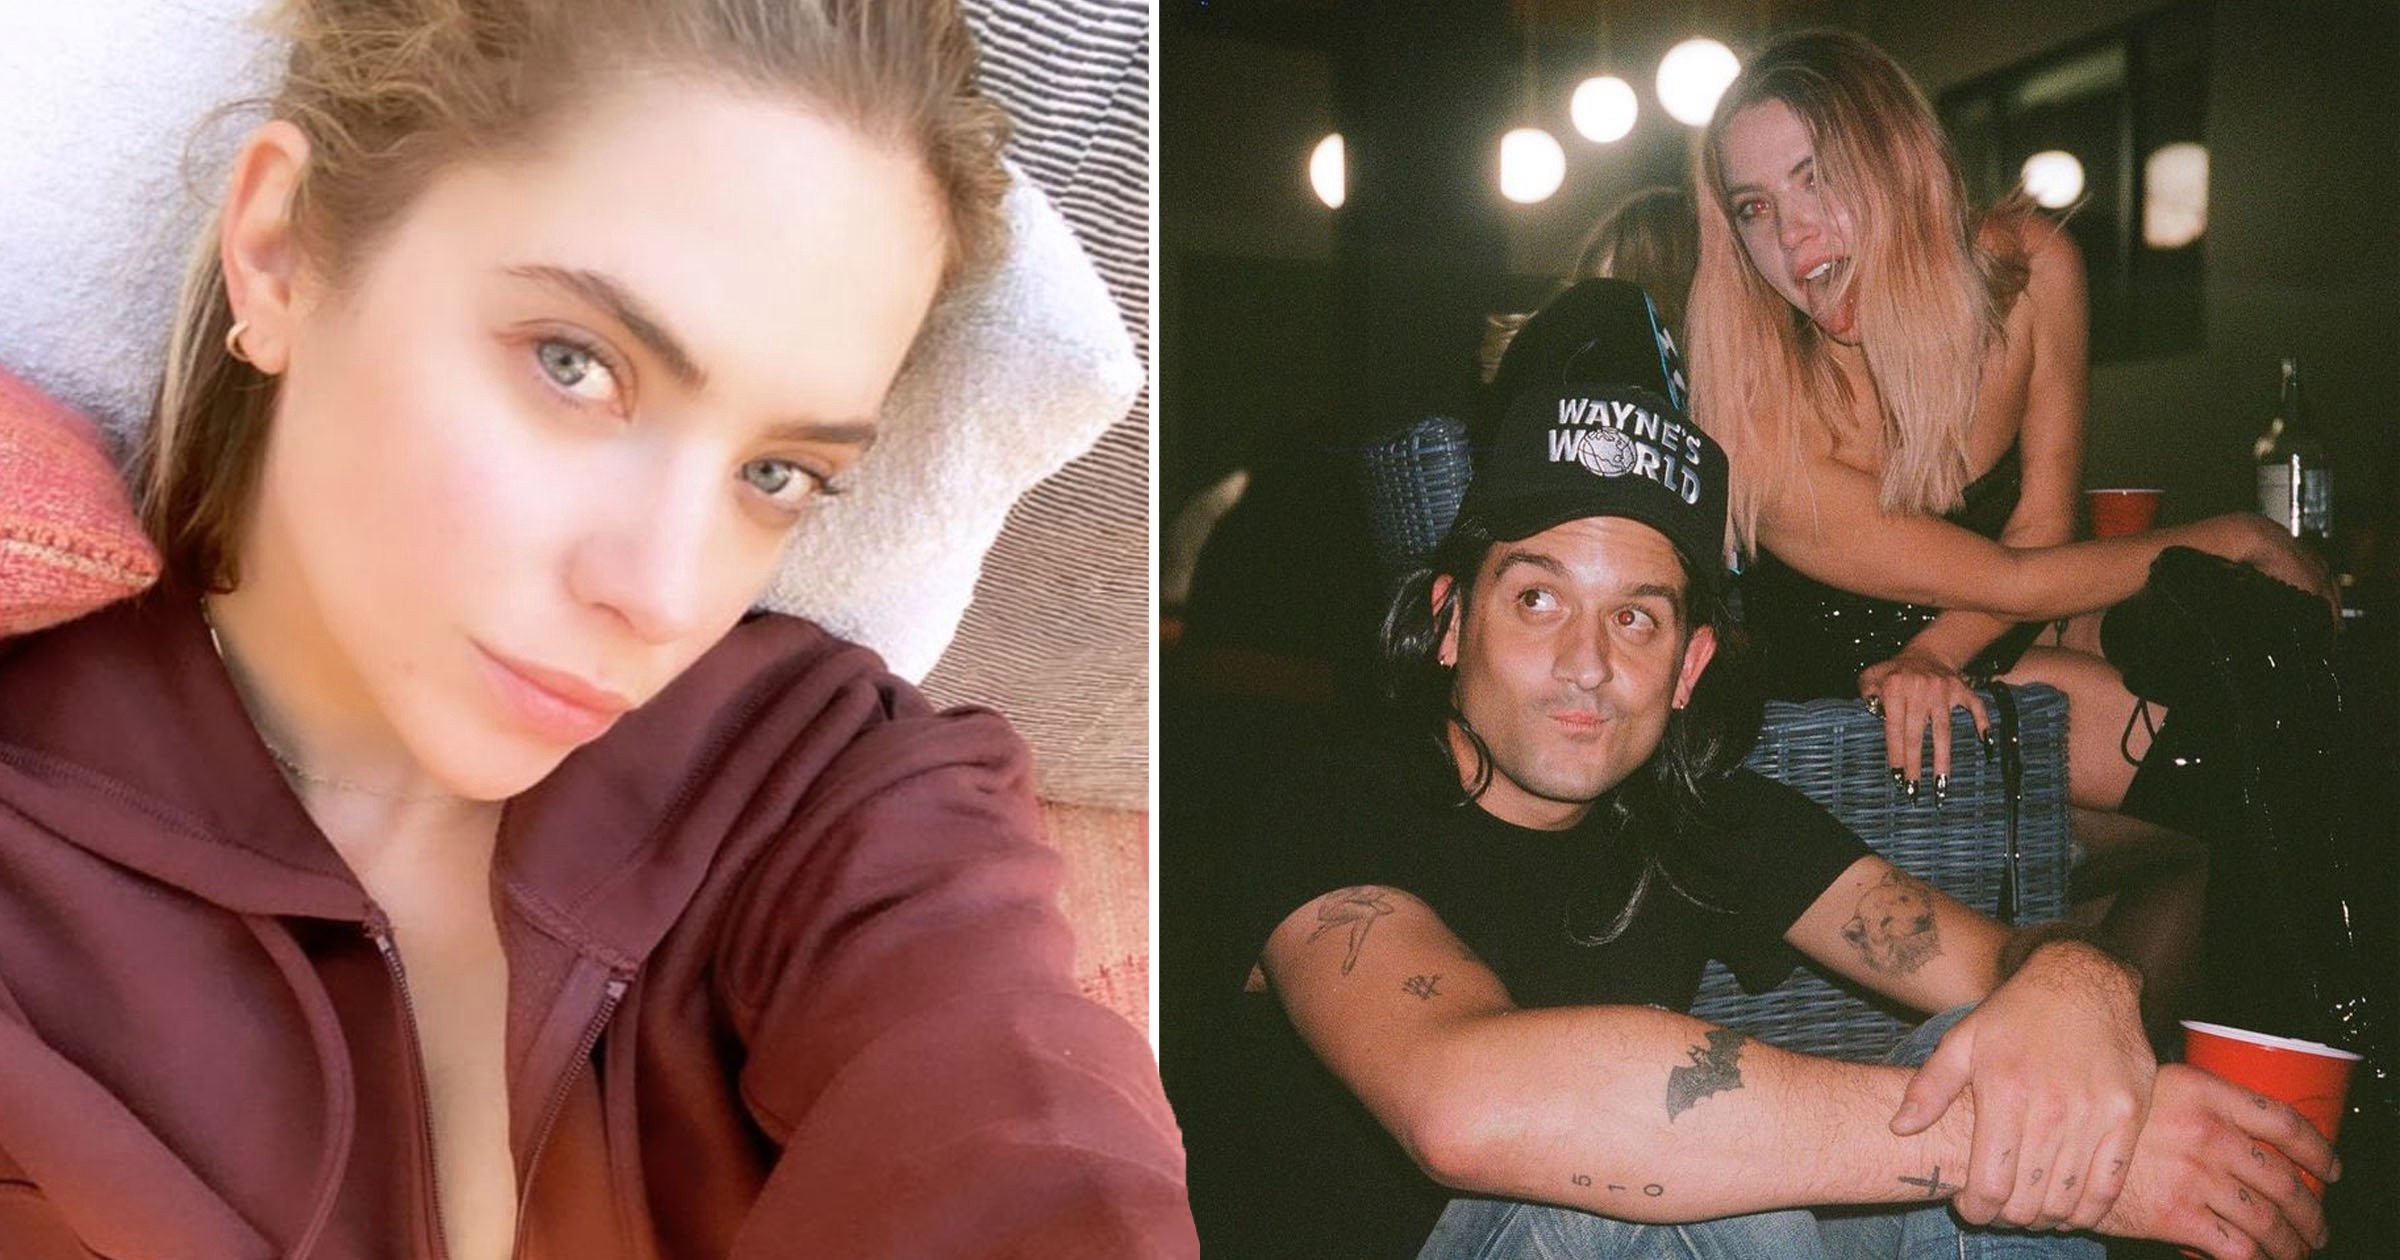 Ashley Benson ‘splits’ from G-Eazy after nine months of dating